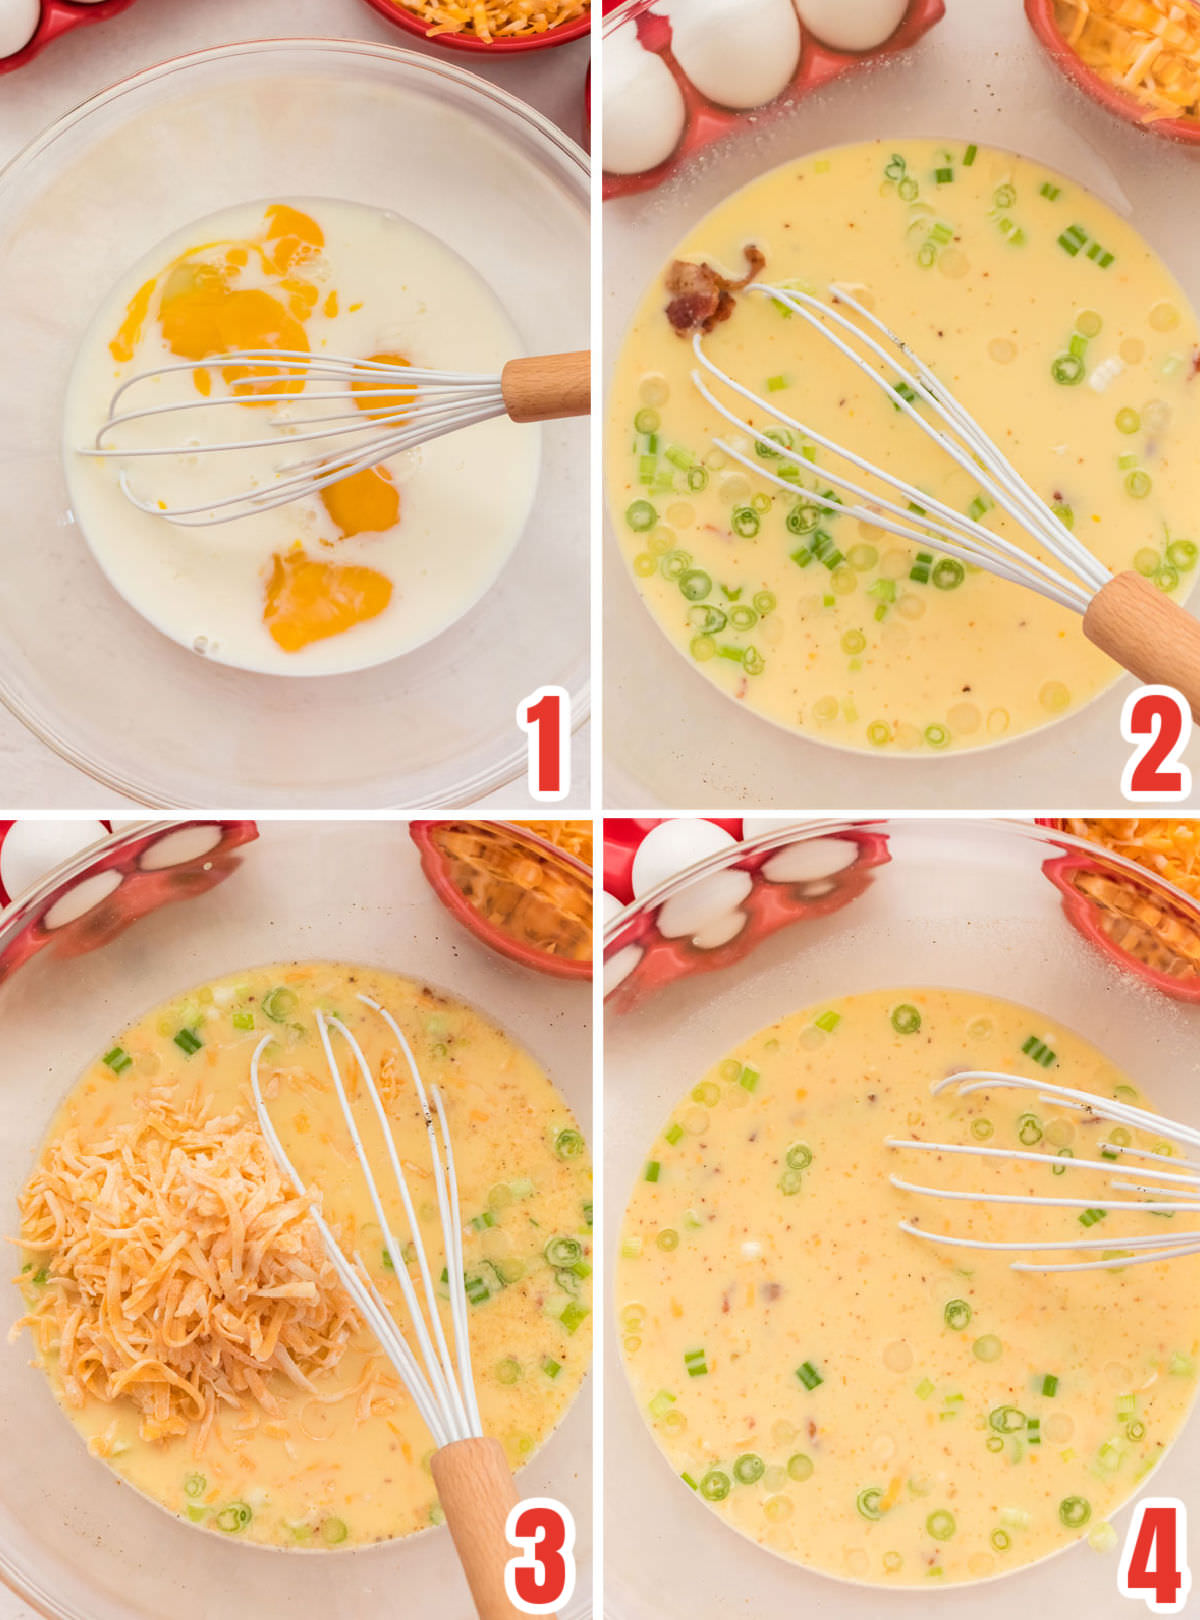 Collage image showing the steps for making the egg mixture.